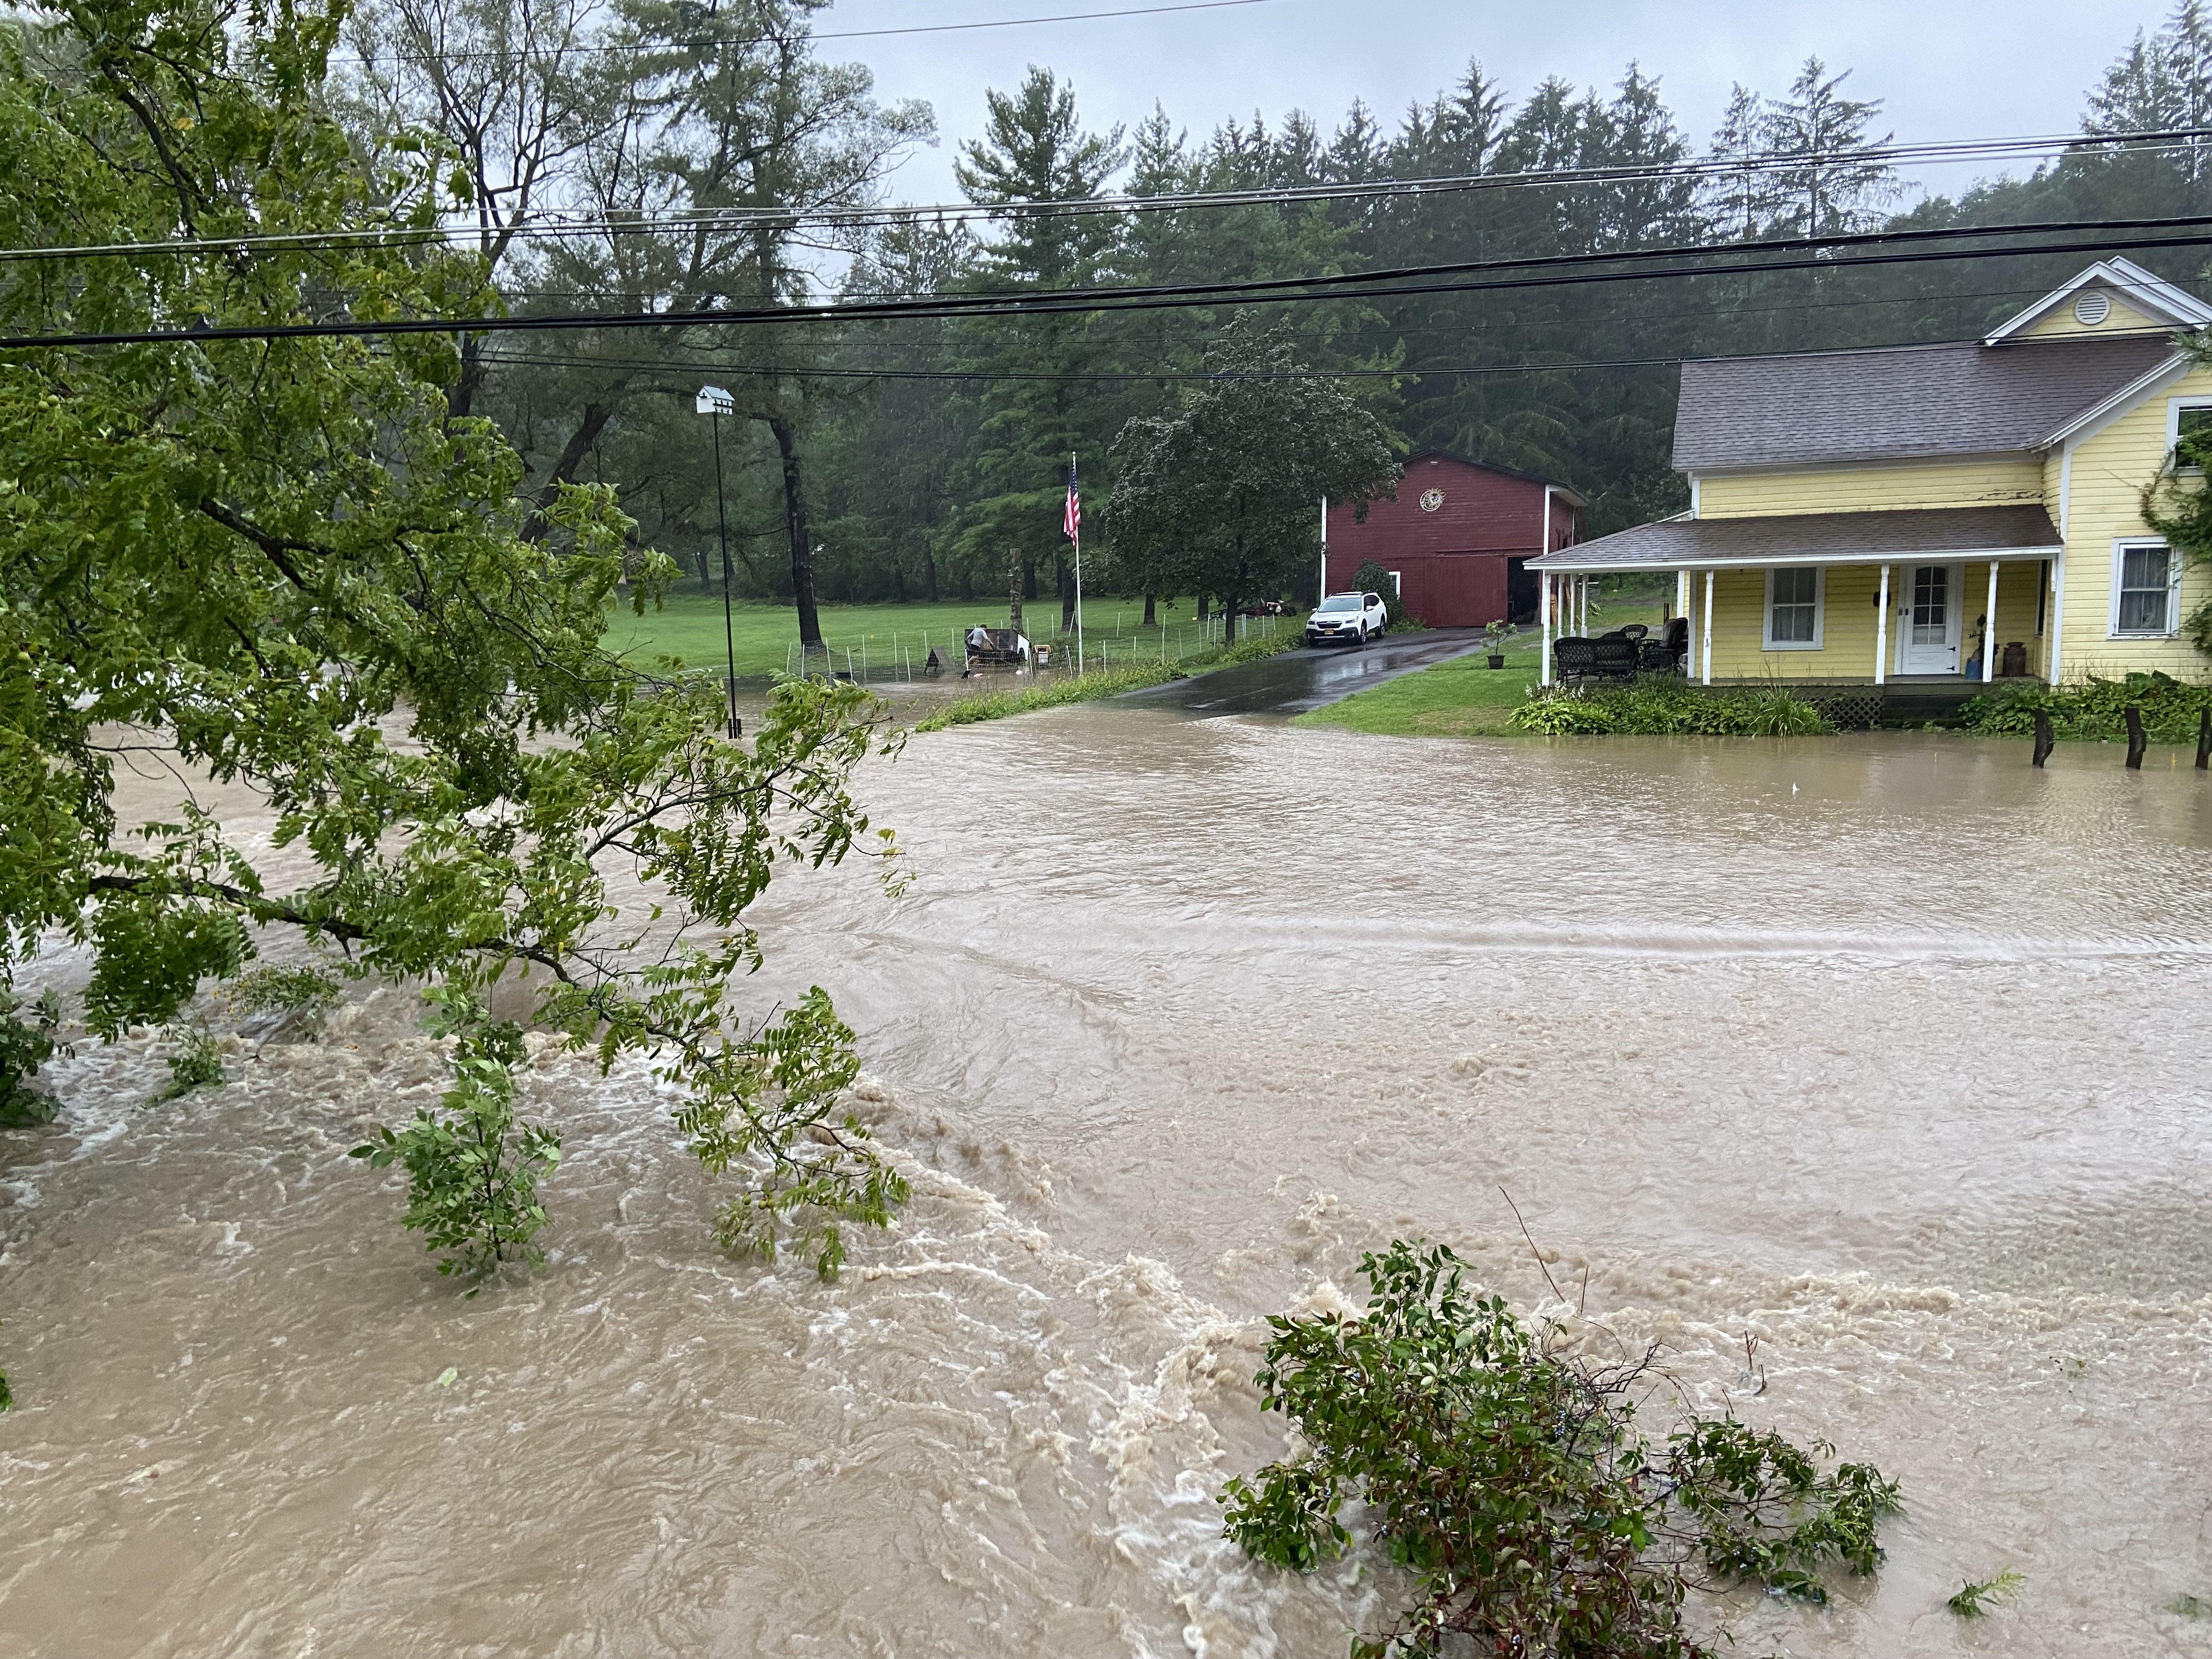 Flood waters rush over South Street Road, (Route 174) near Nightengale Mills in the town of Marcellus on Thursday, Aug. 19, 2021.